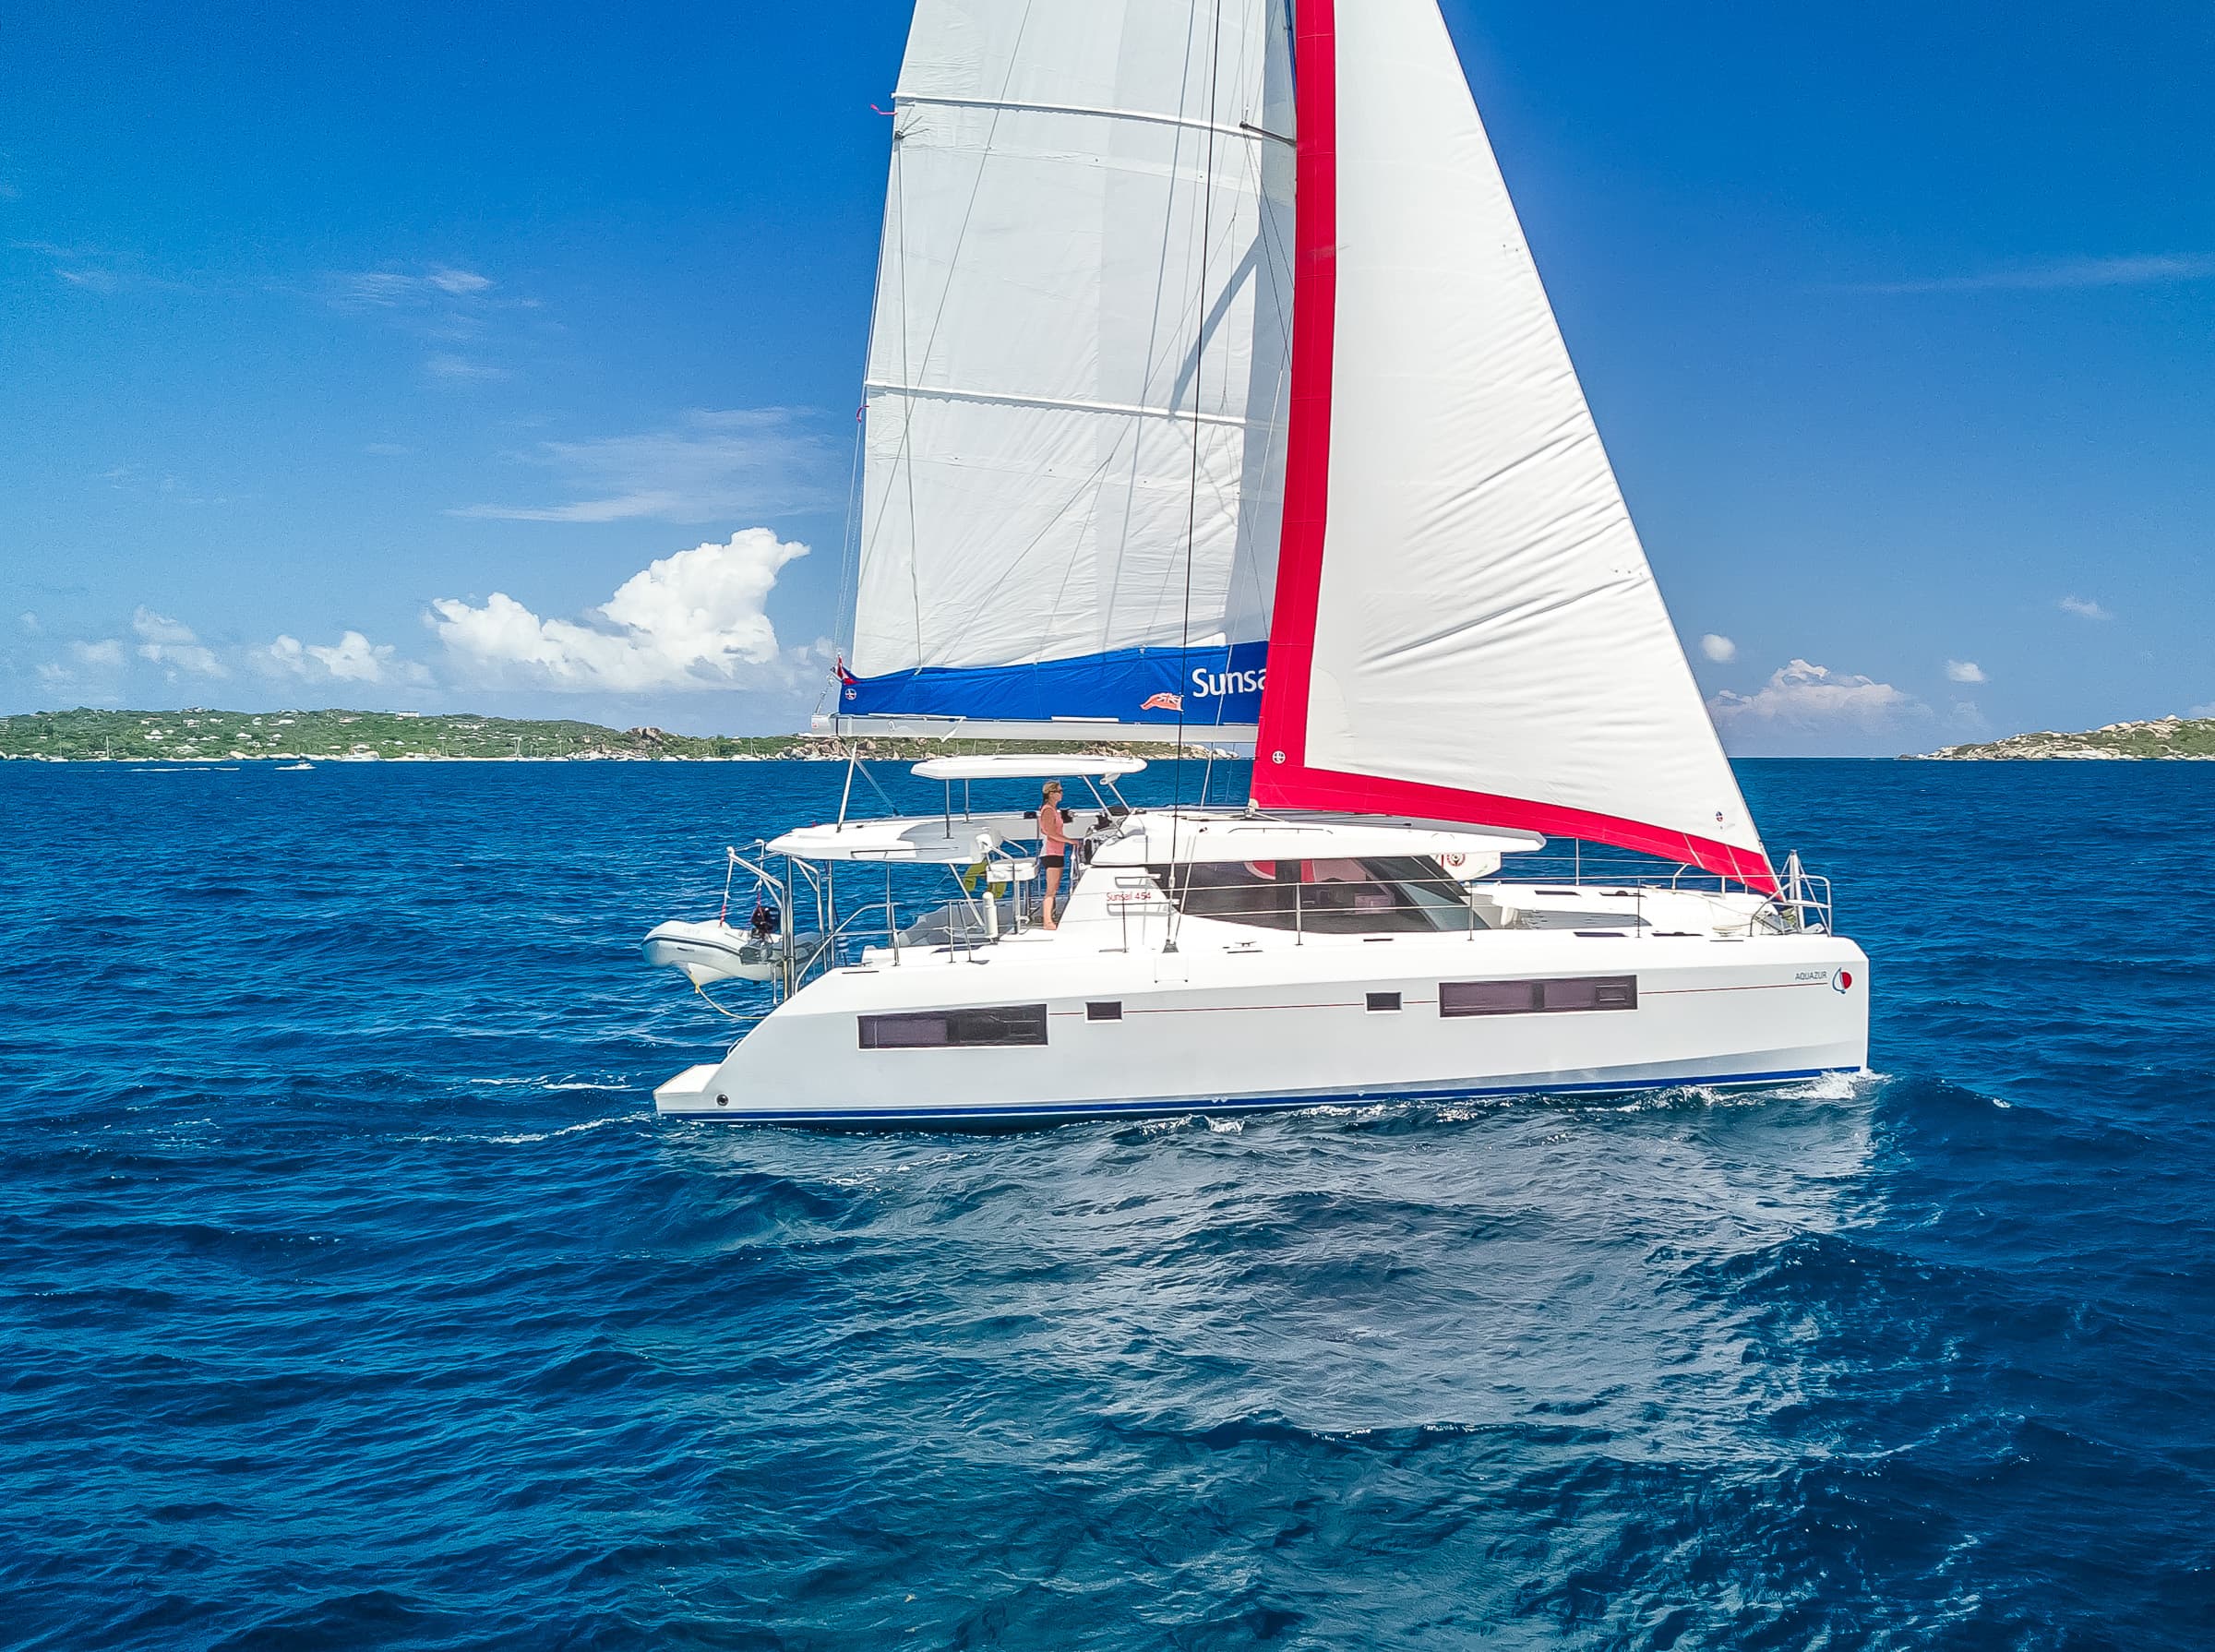 Sail the BVI's with The Uncommon Caribbean x Sunsail BVI's Rum & The Sea Giveaway